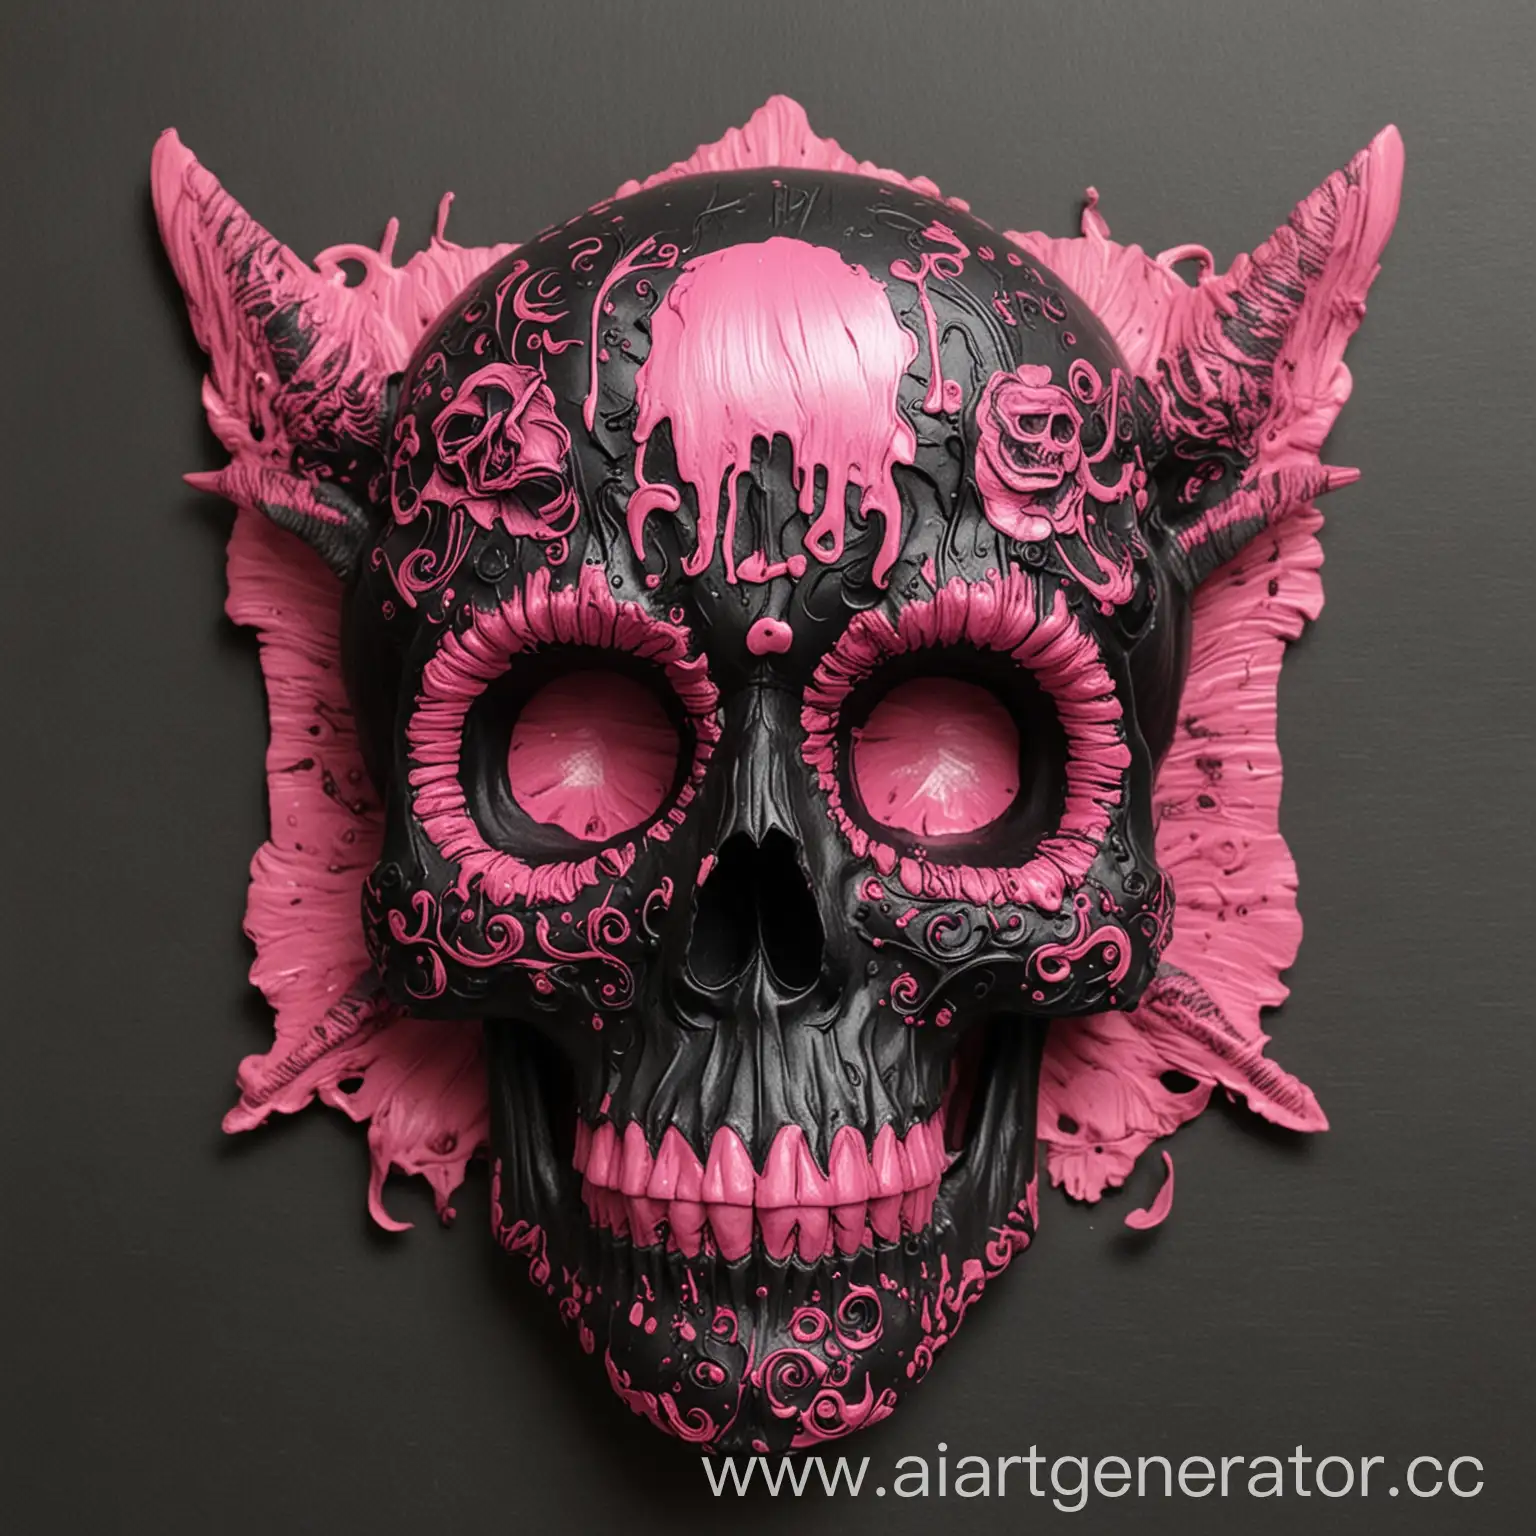 Eerie-Black-and-Pink-Skull-Art-Mysterious-and-Bold-Digital-Illustration